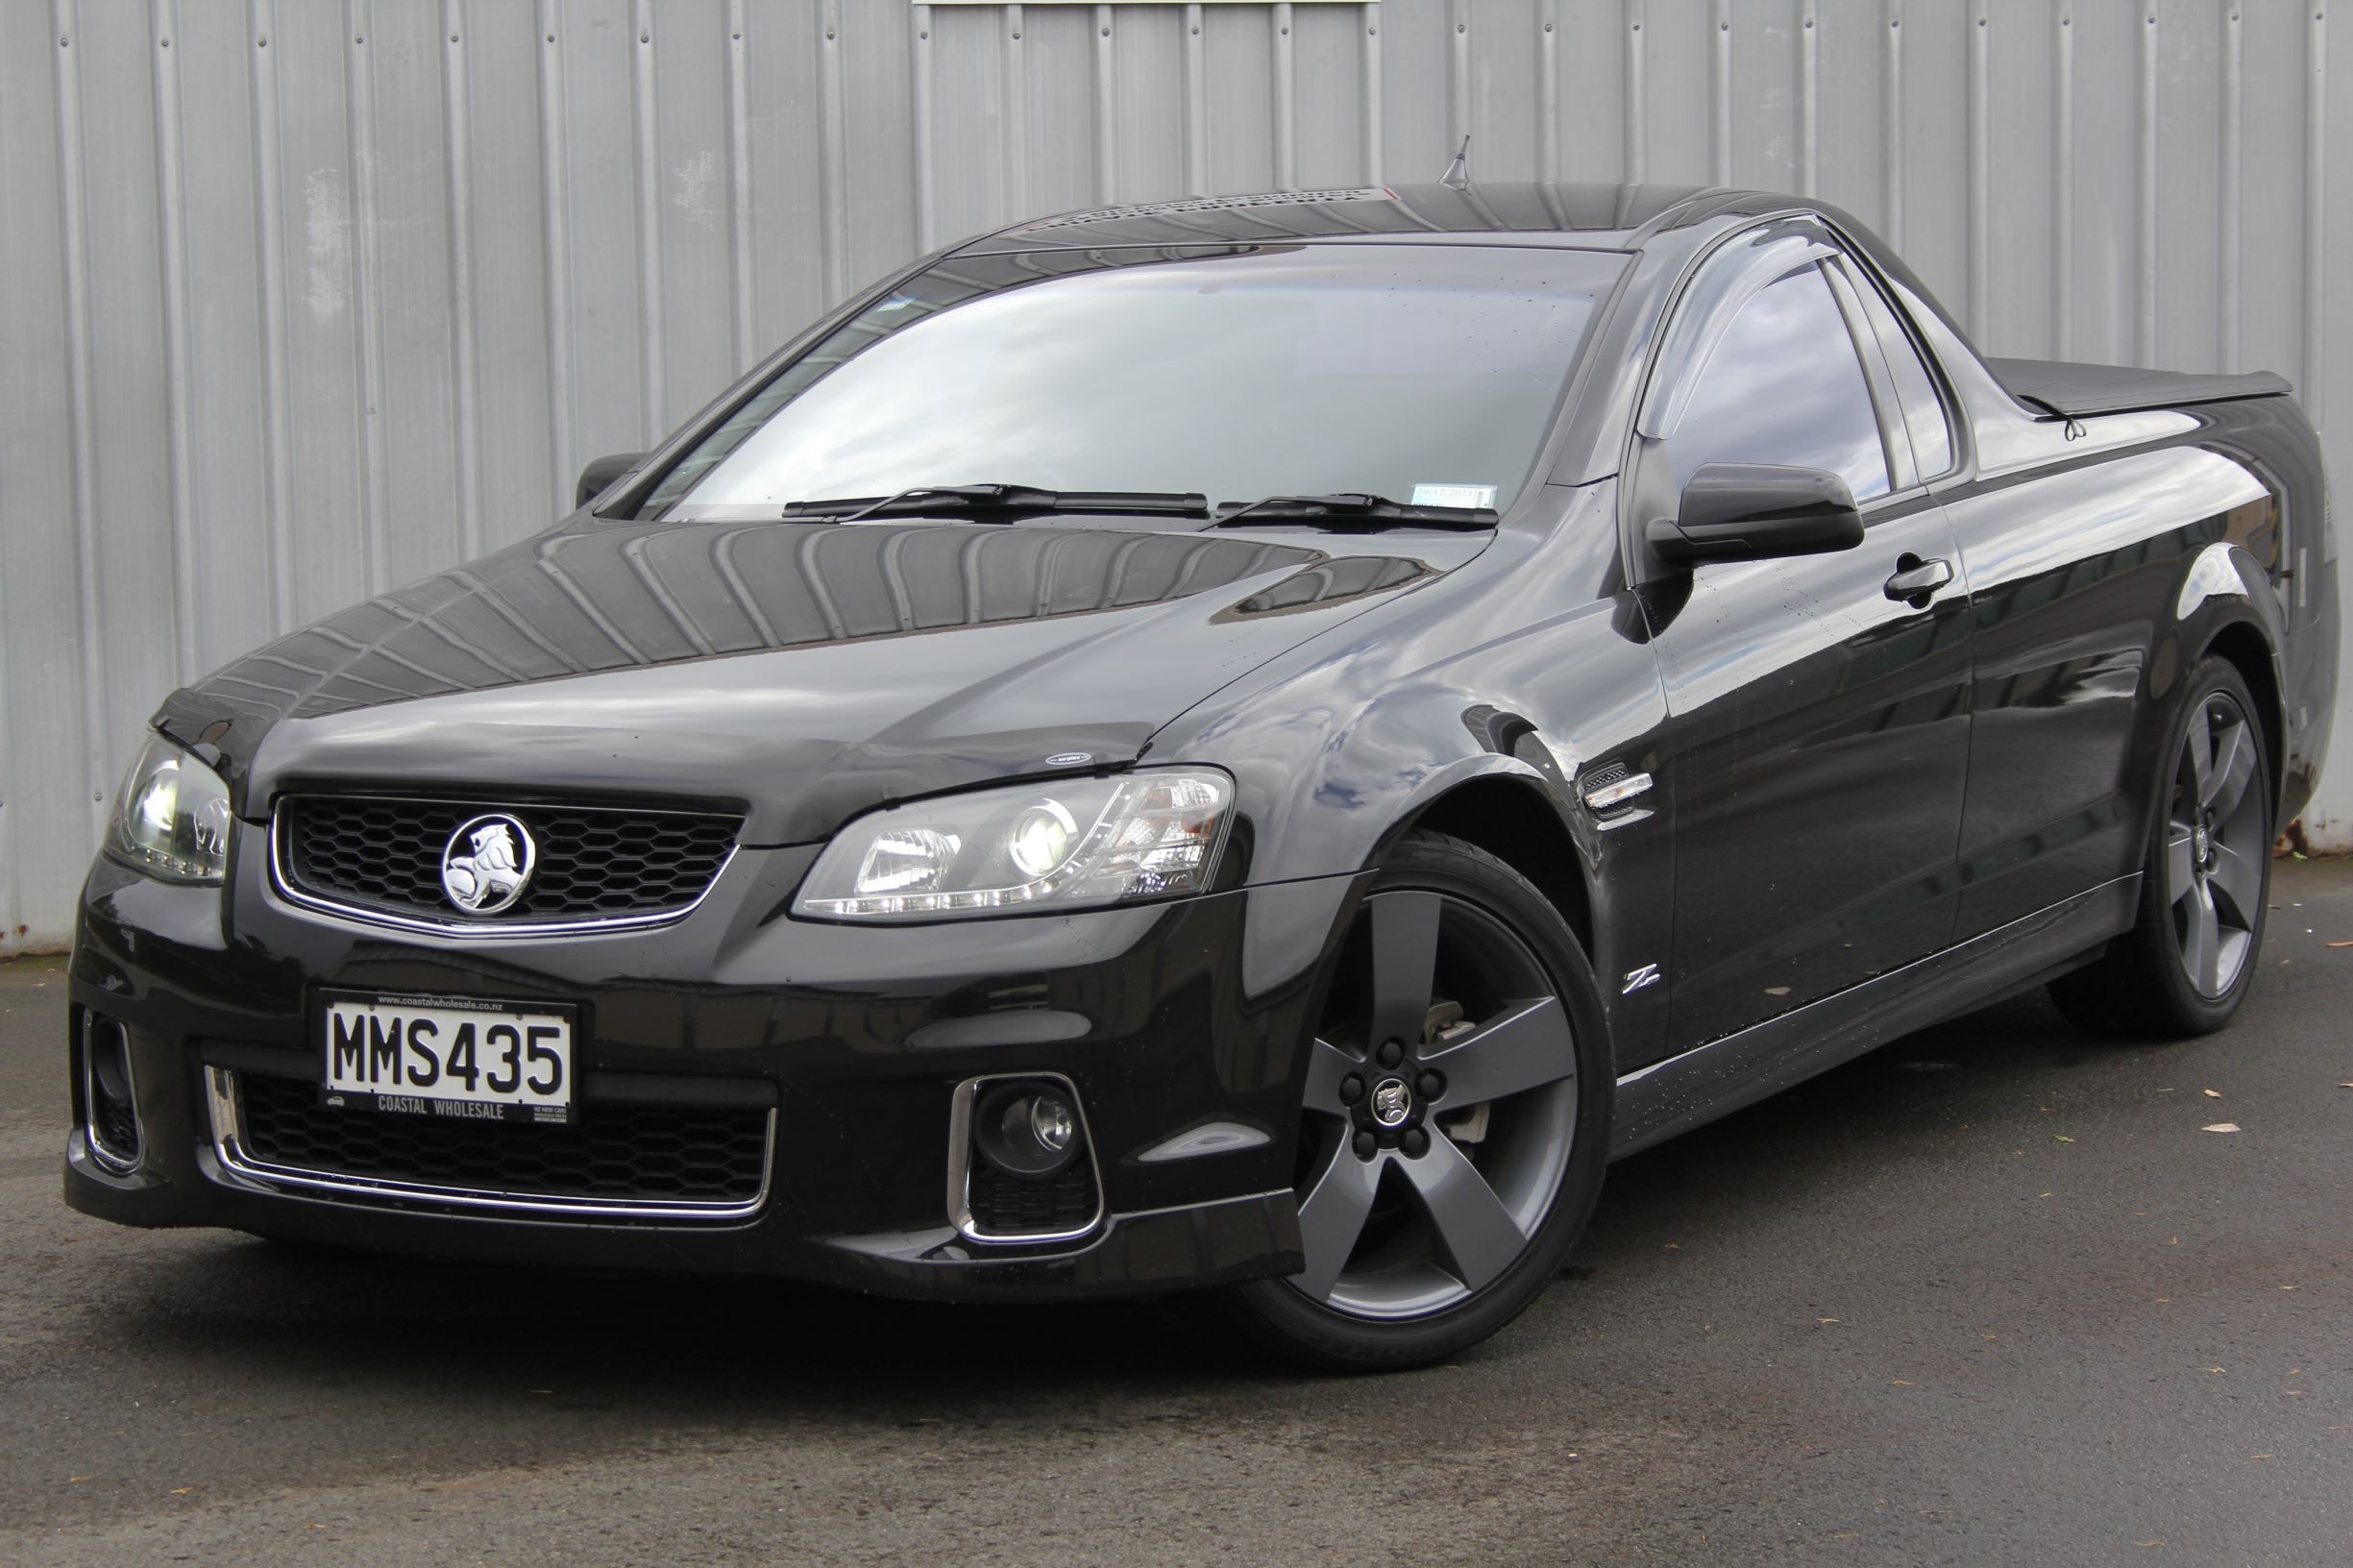 Holden Commodore Z series 2012 for sale in Auckland